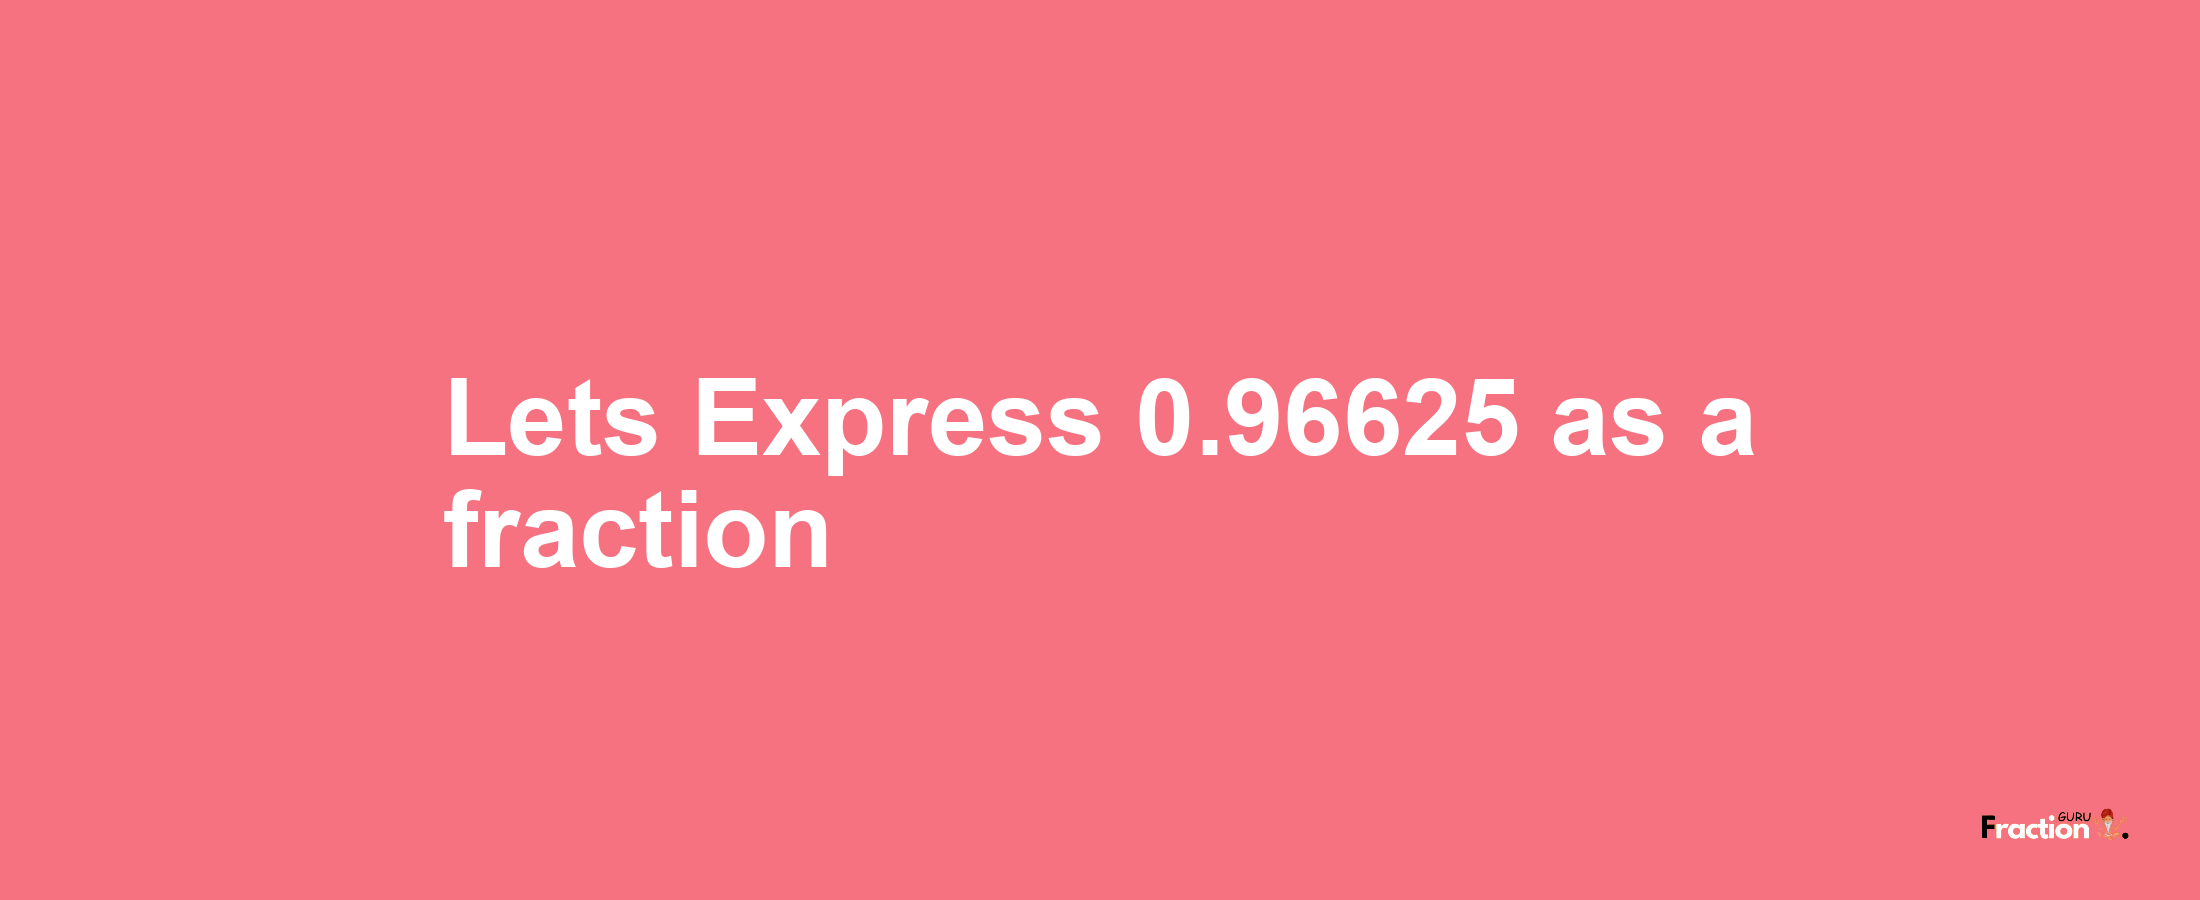 Lets Express 0.96625 as afraction